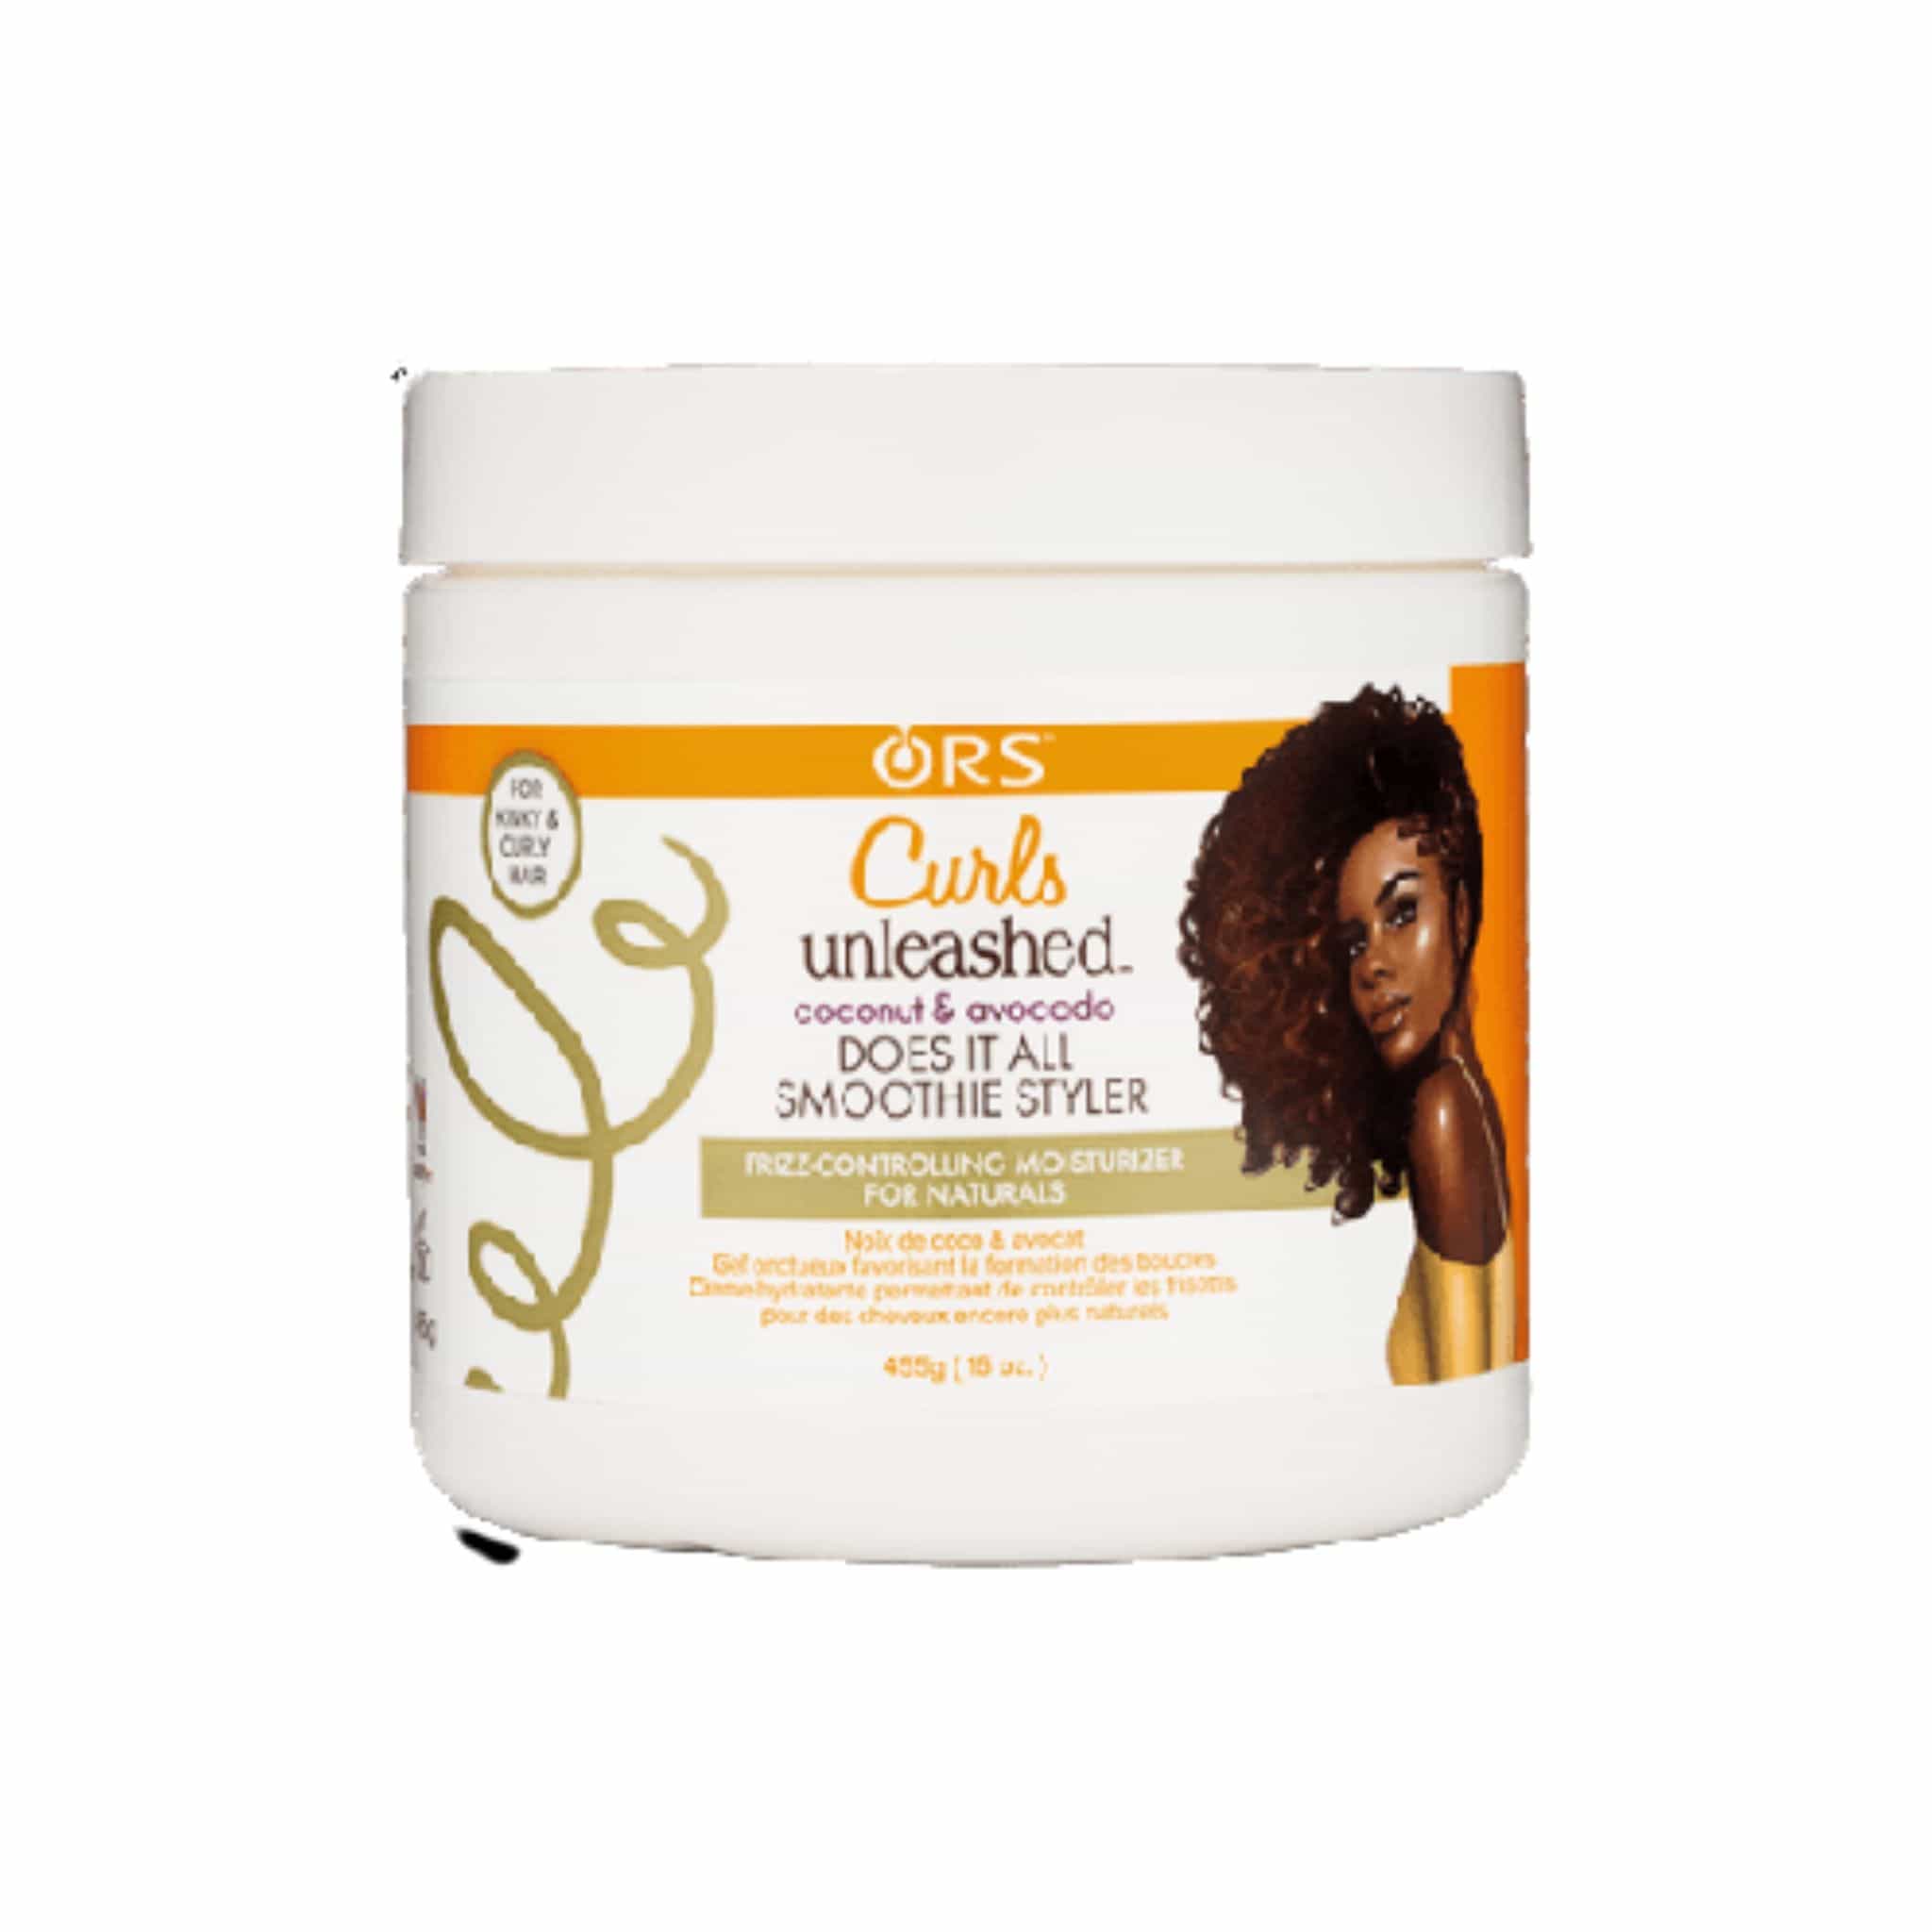 GEL DEFINIDOR CURL ITS ALL SMOOTHIE STYLER COCONUT AND AVOCADO CURLS UNLEASHED ORS 455G